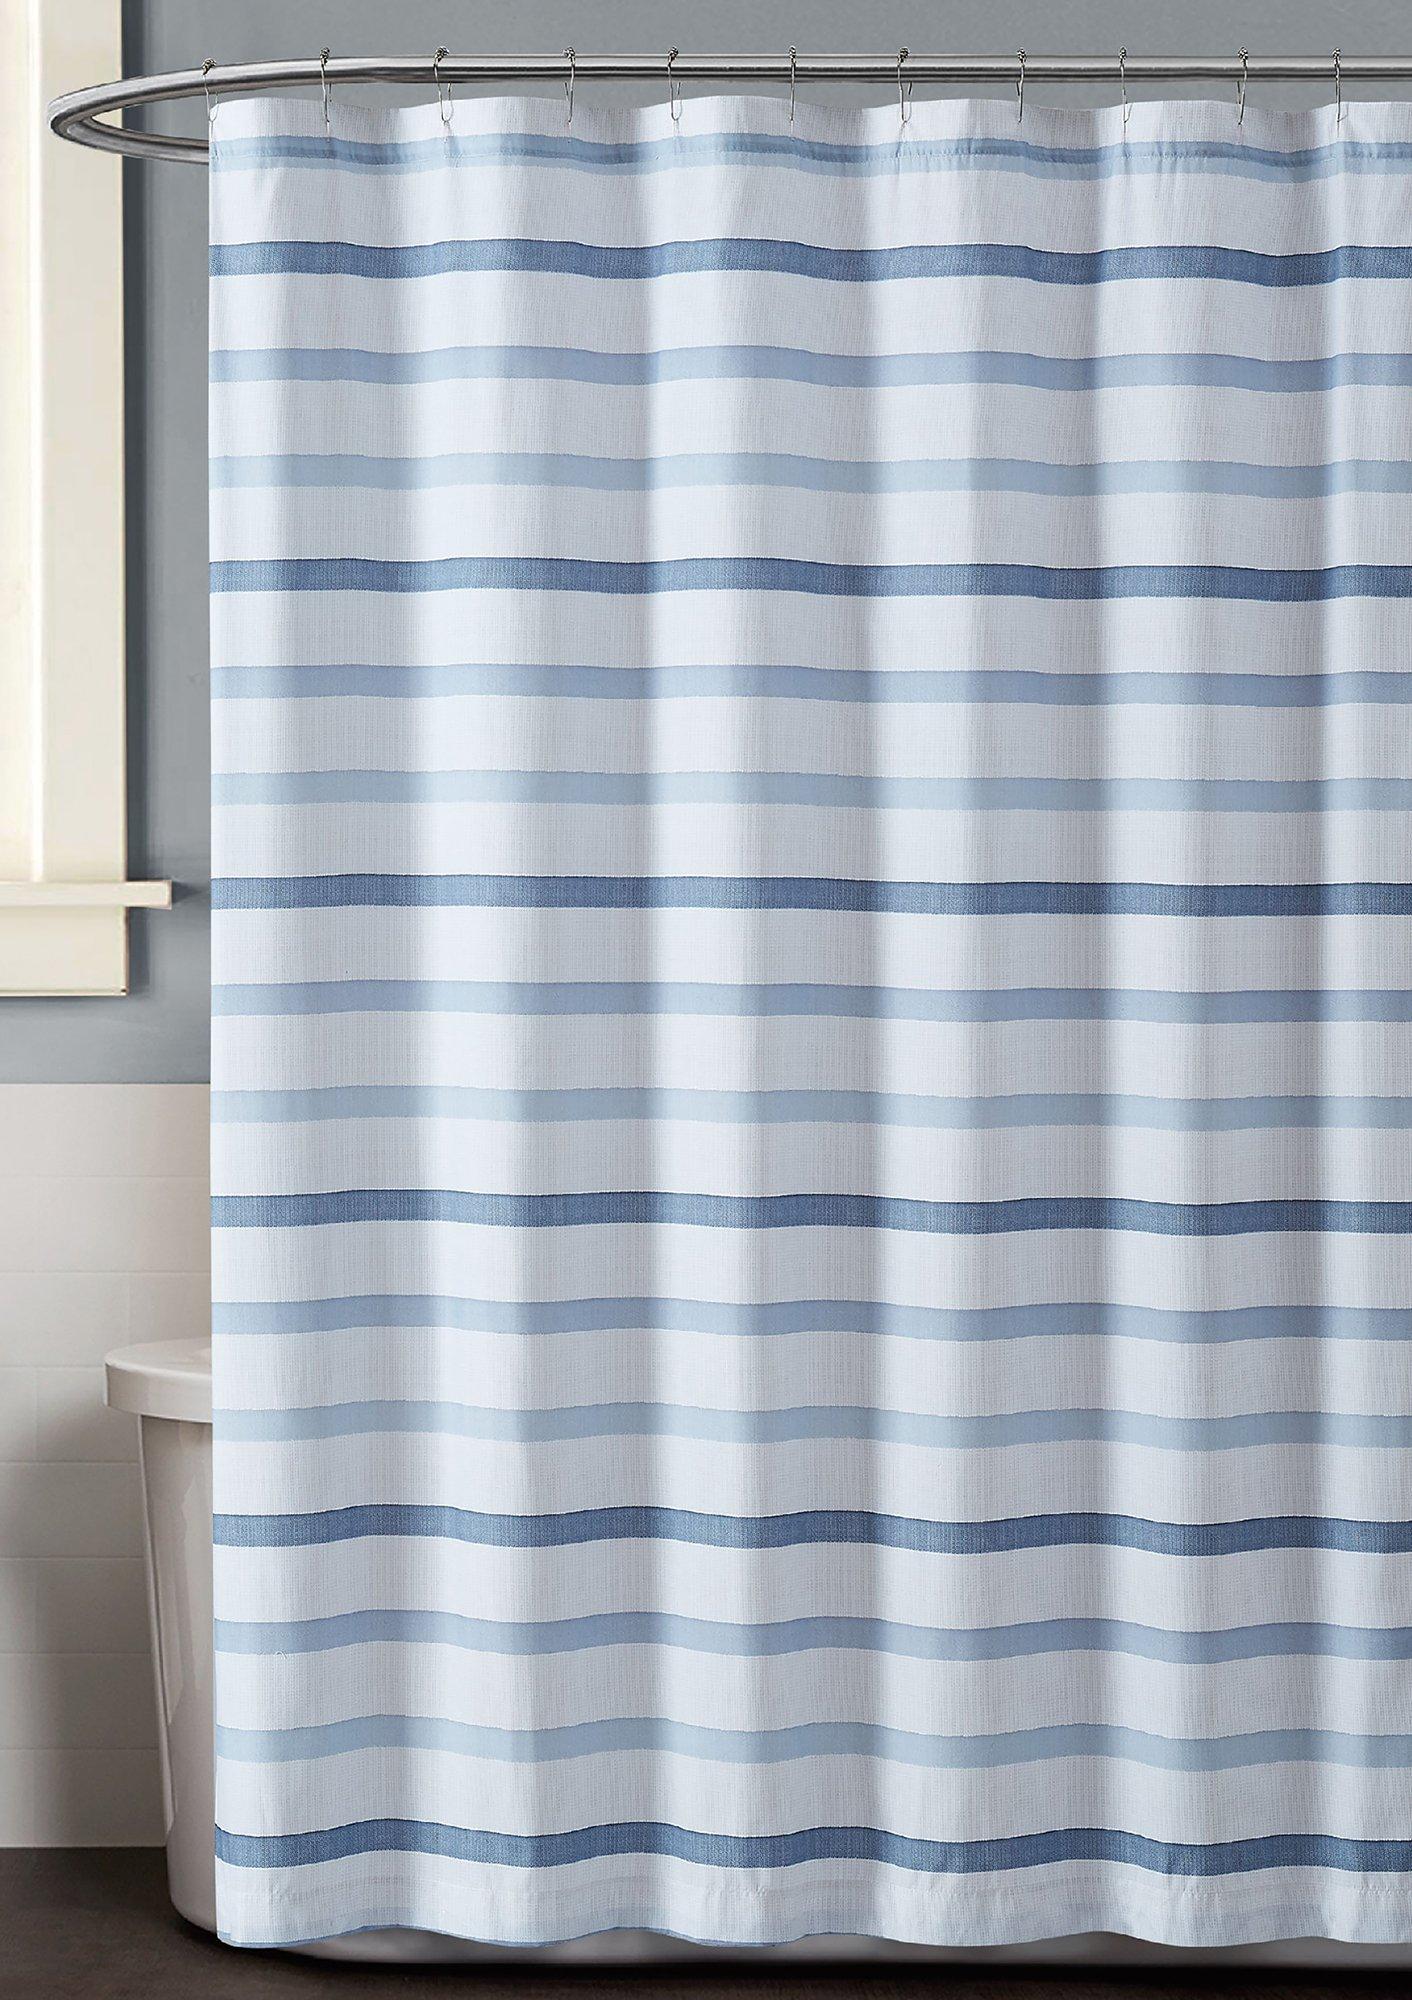 Photos - Other sanitary accessories Truly Soft Waffle Stripe Shower Curtain